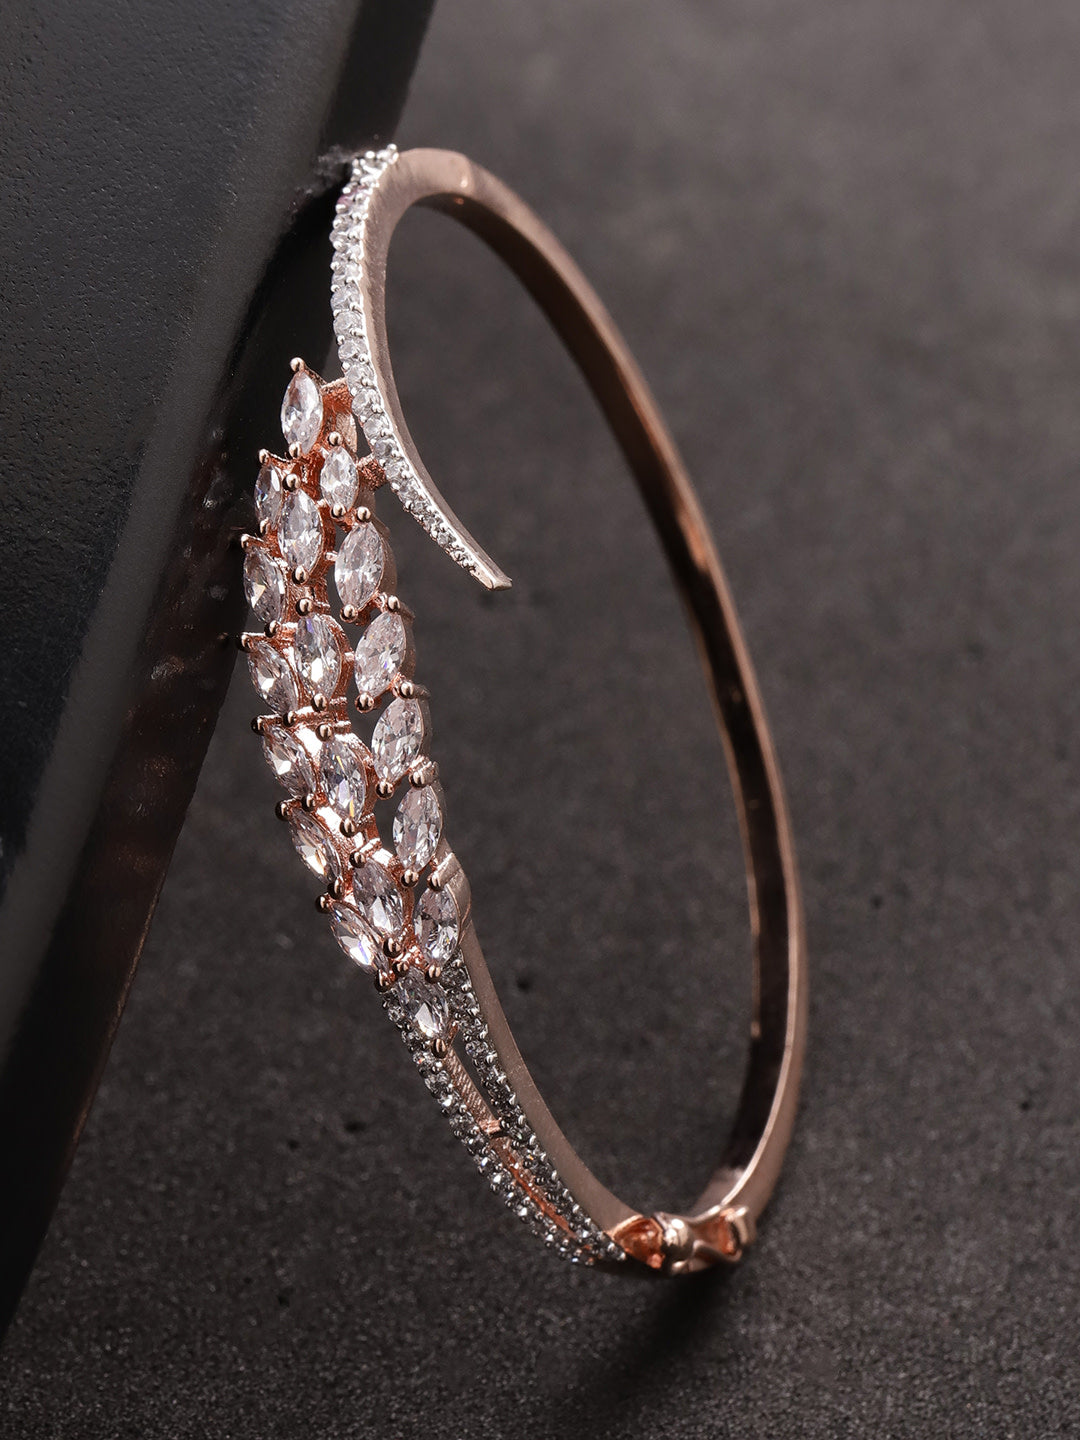 Gold-Toned Rhodium-Plated CZ Stone-Studded Bracelet For Women And Girls